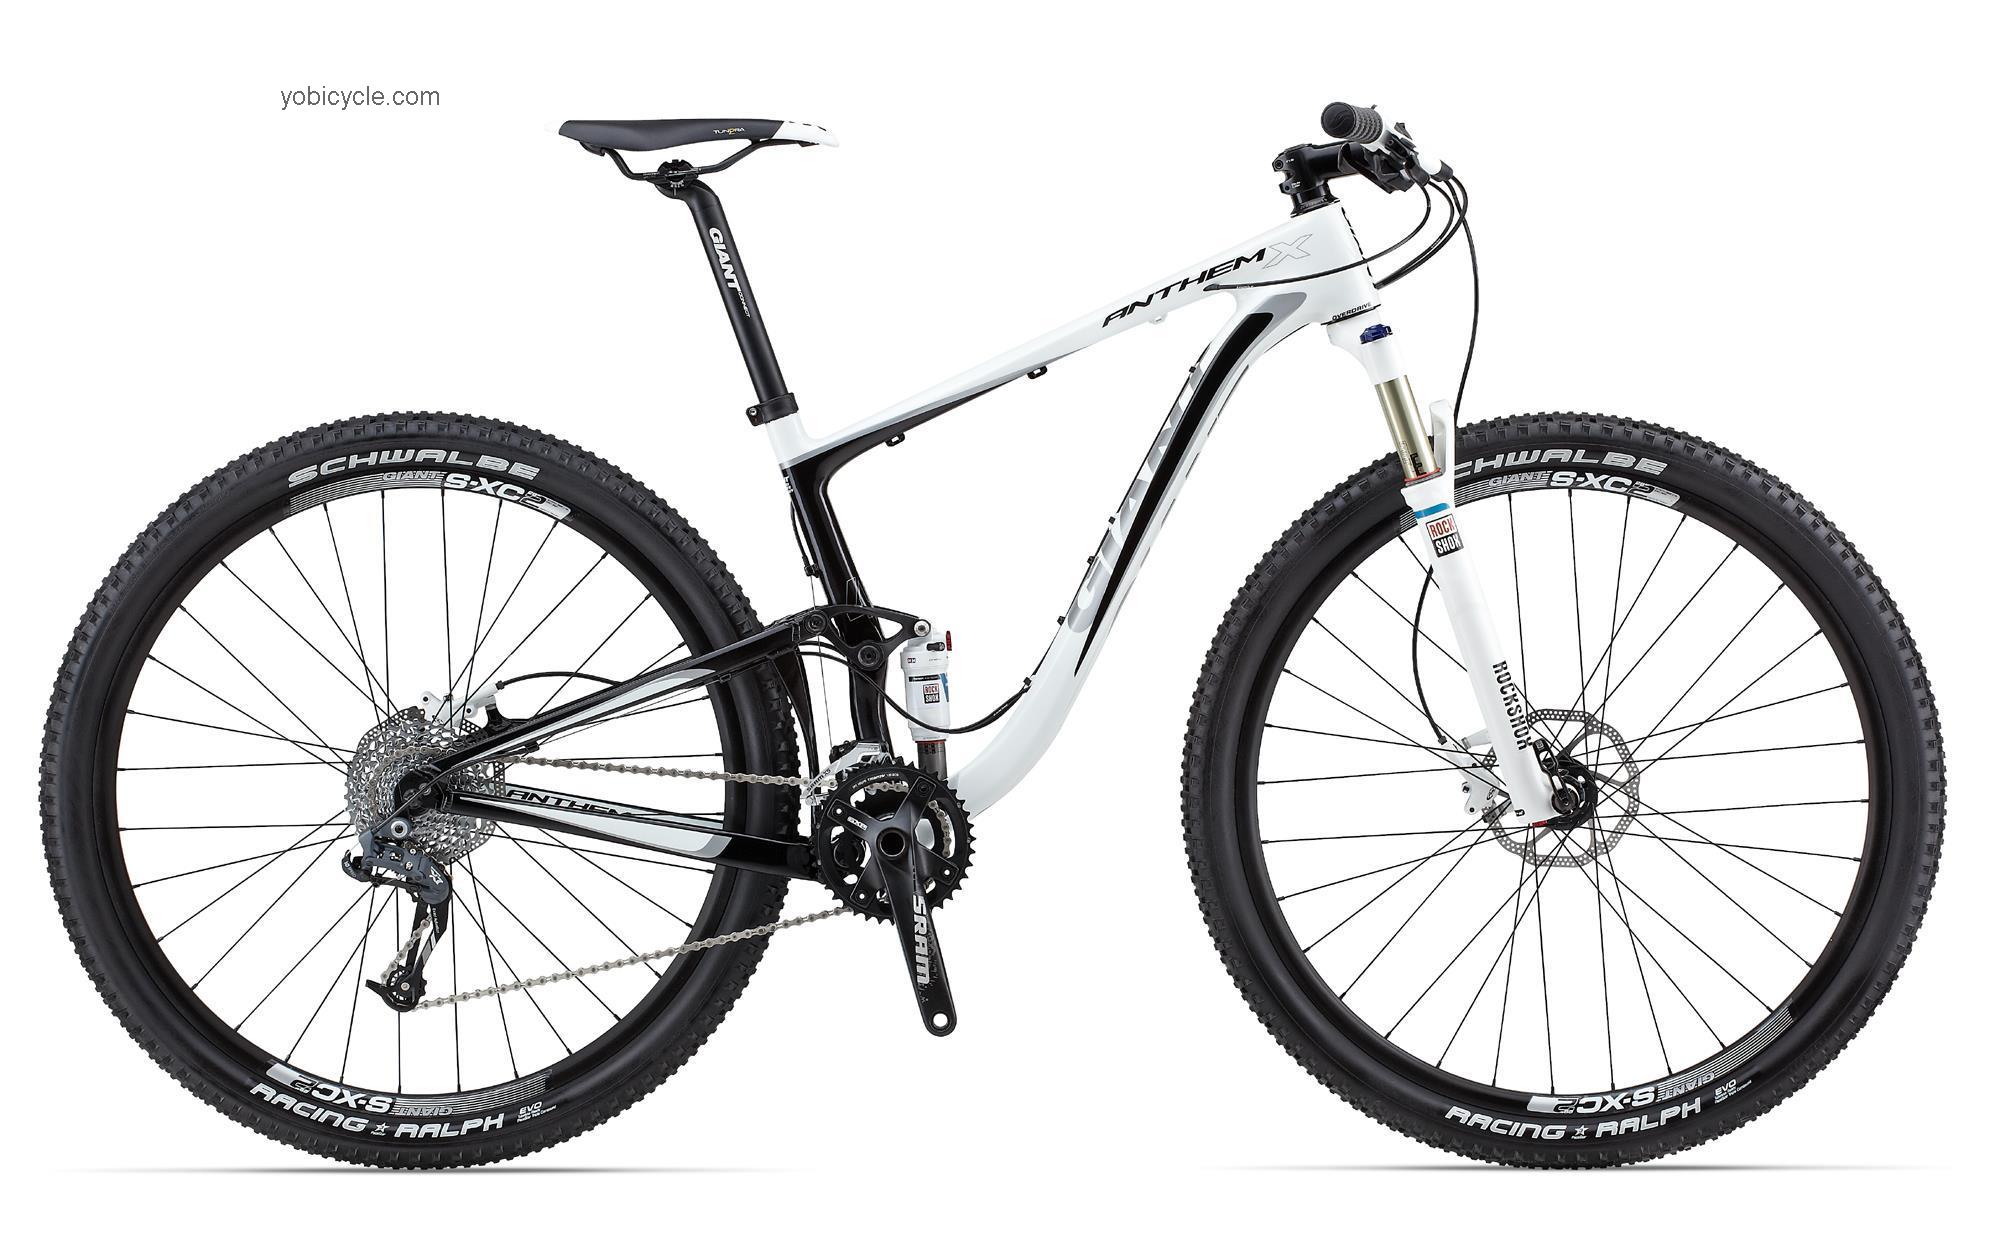 Giant Anthem X Advanced 29er 2 2013 comparison online with competitors